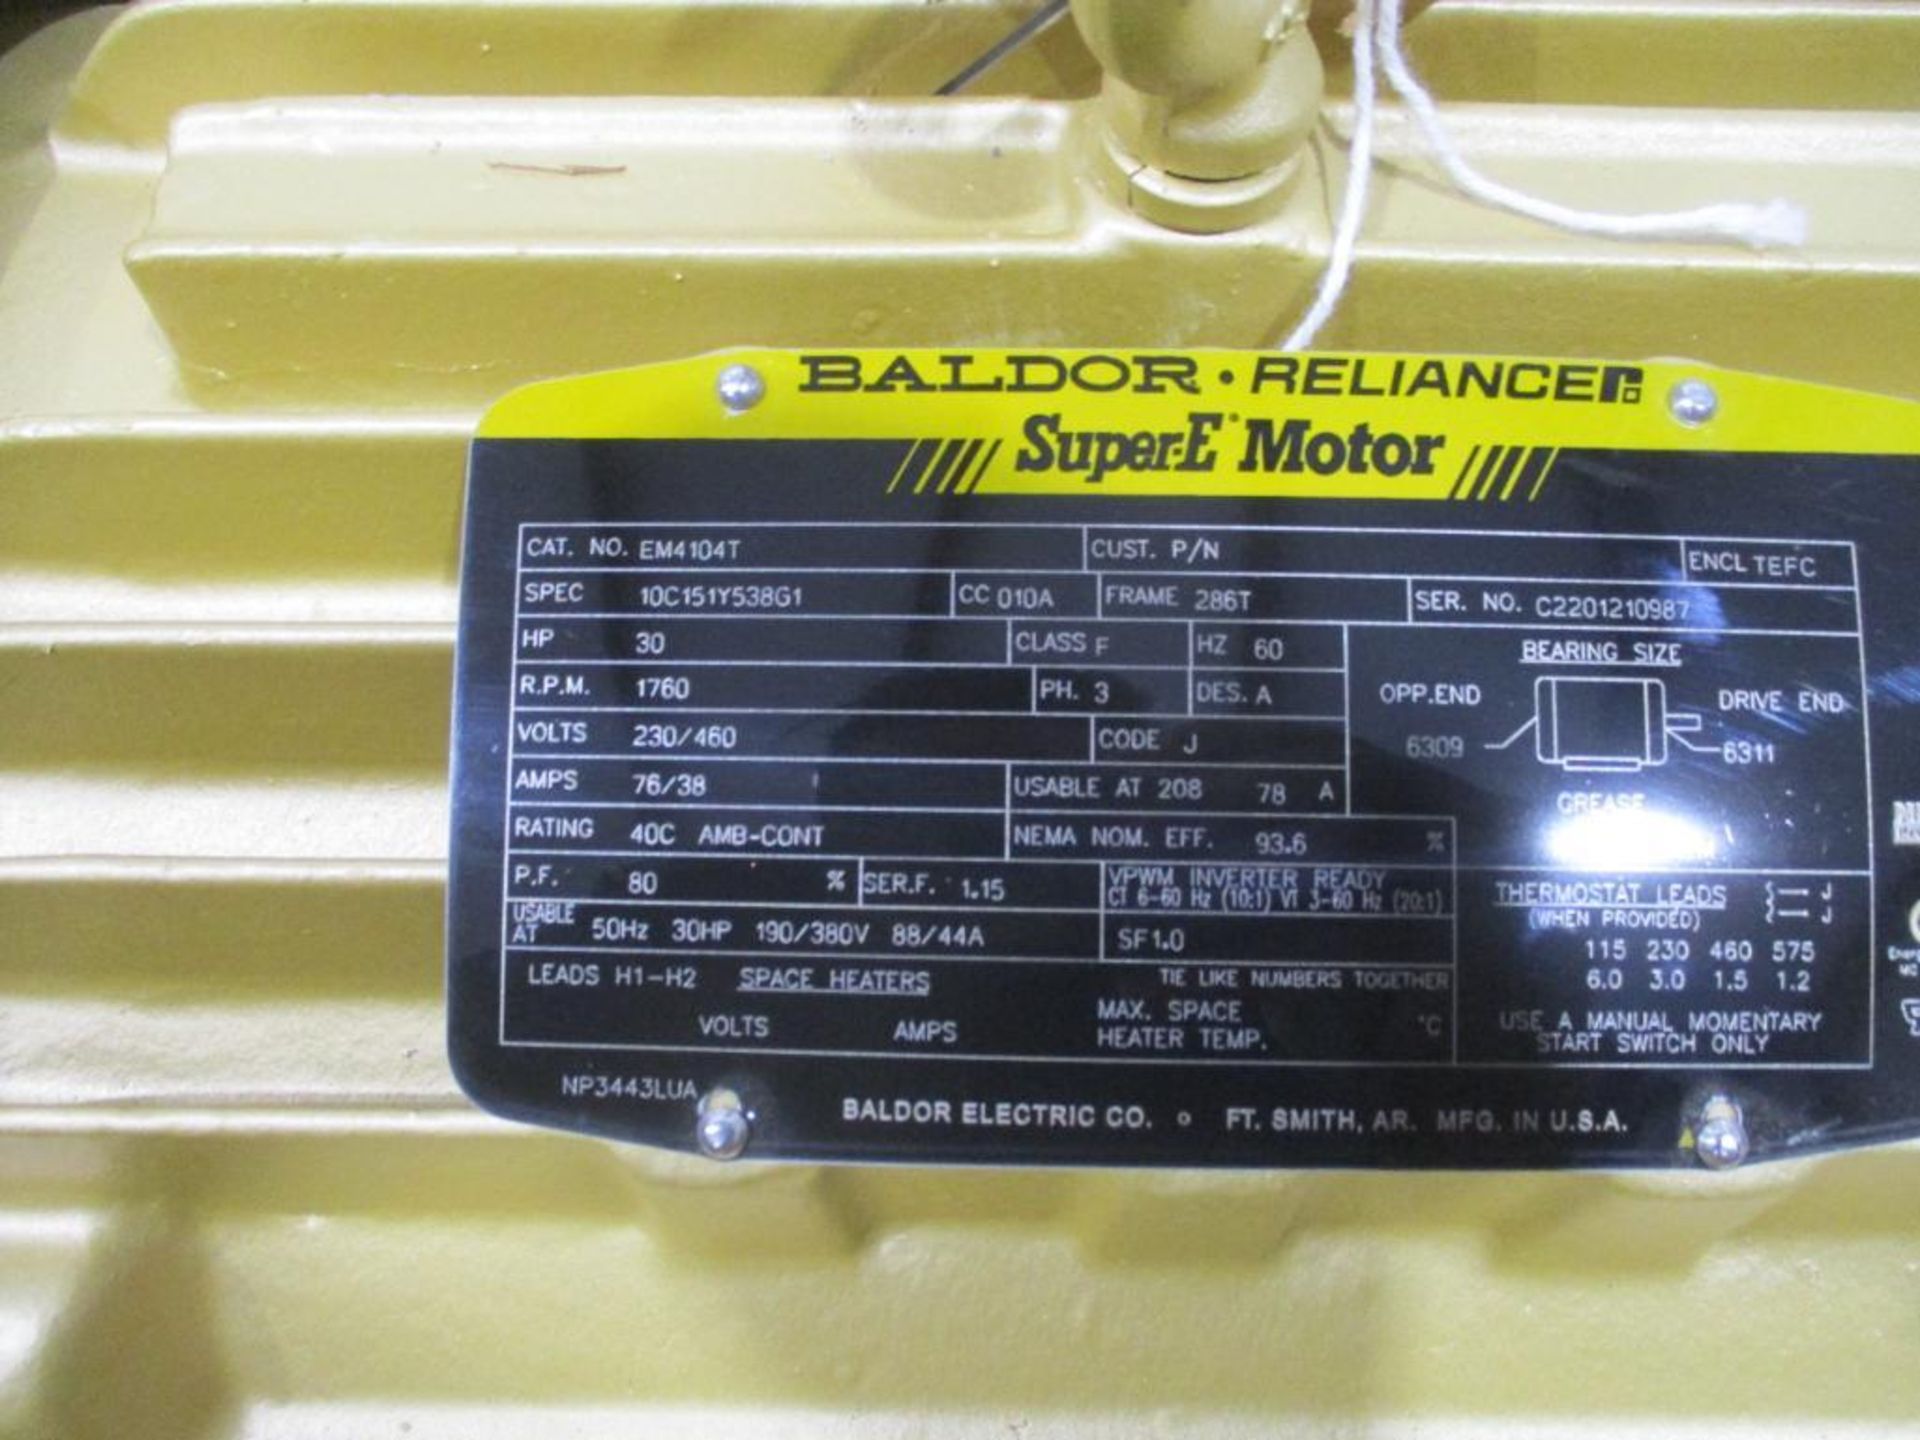 BALDOR 3 PHASE 30HP 1760RPM 286T FRAME A/C MOTOR P/N EM4104T, 425# lbs (There will be a $40 Rigging/ - Bild 5 aus 5